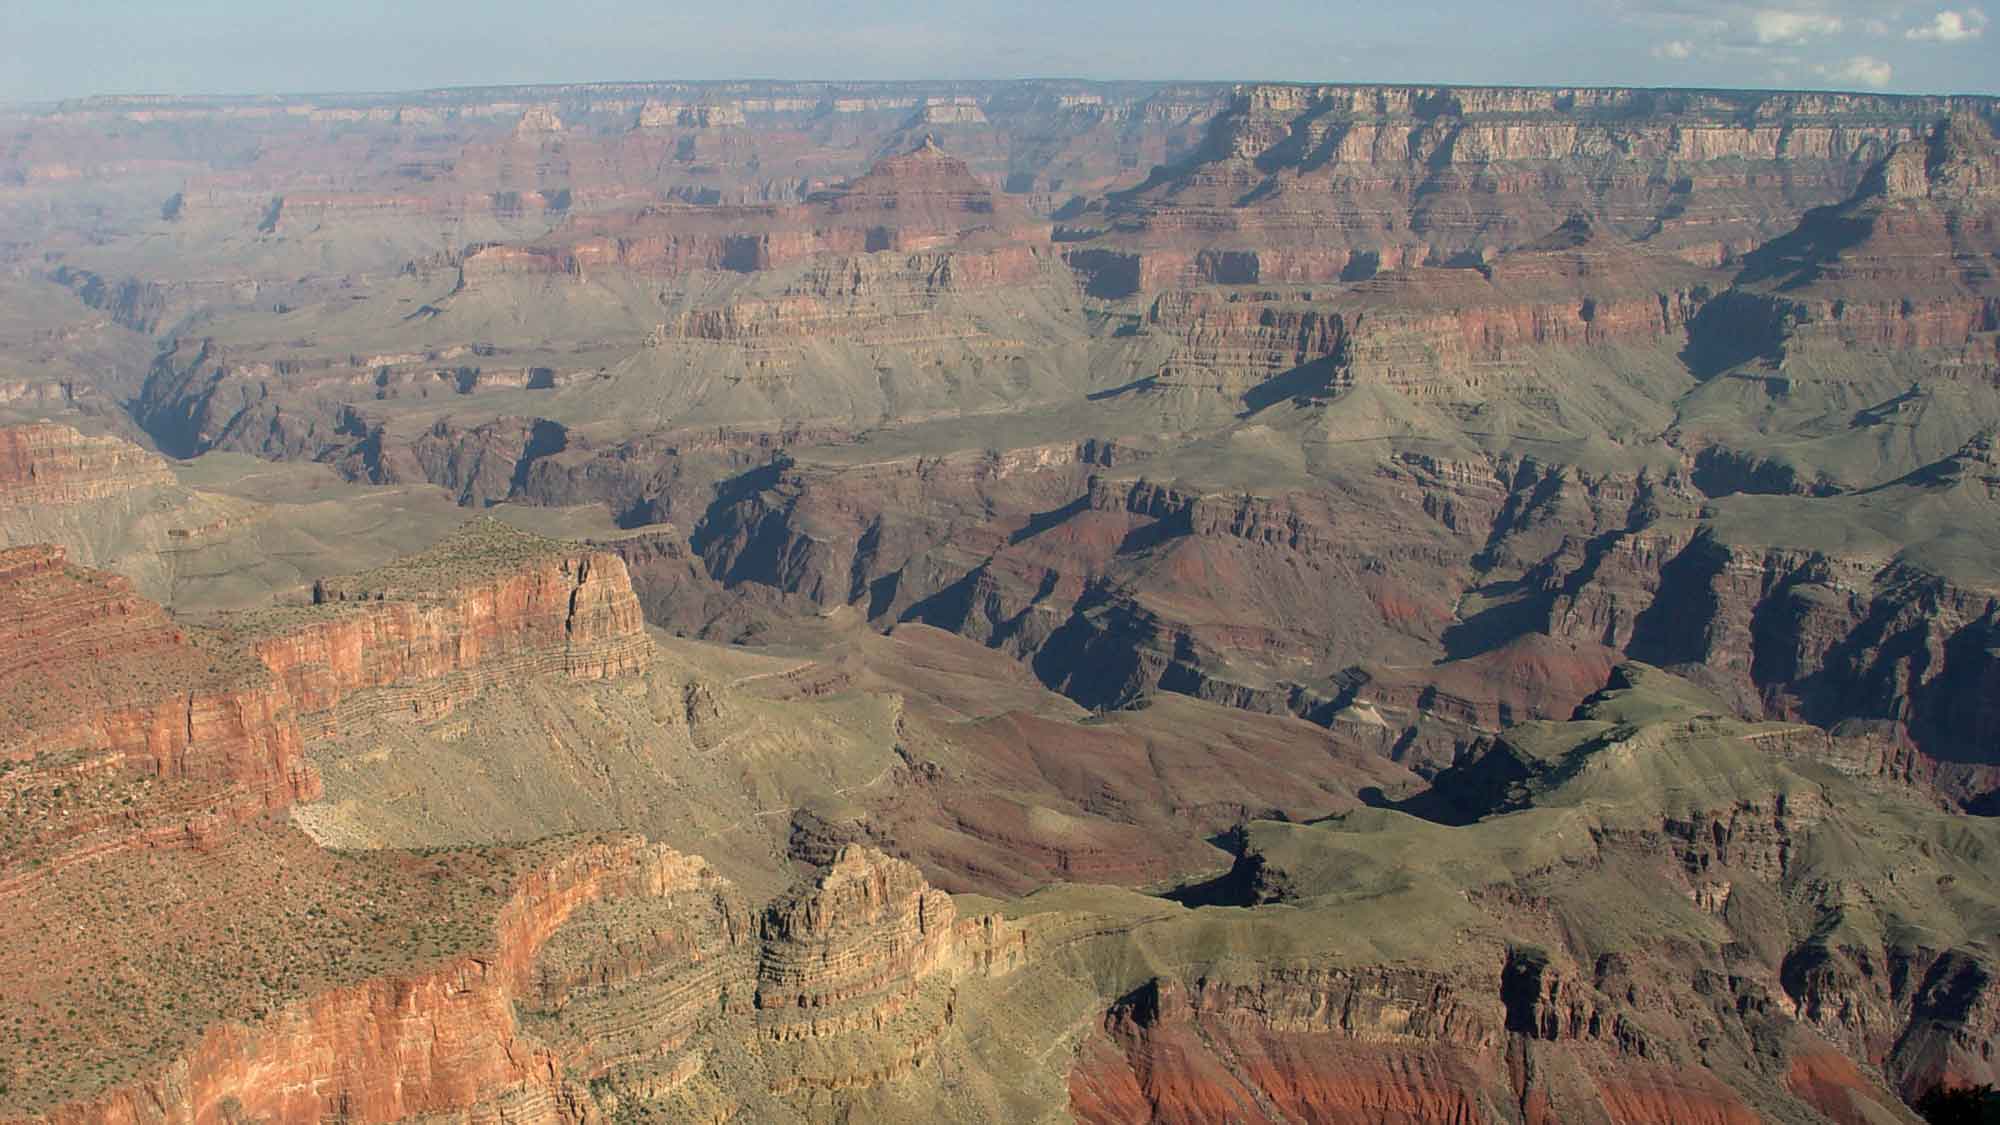 Photograph of the Grand Canyon in Arizona.